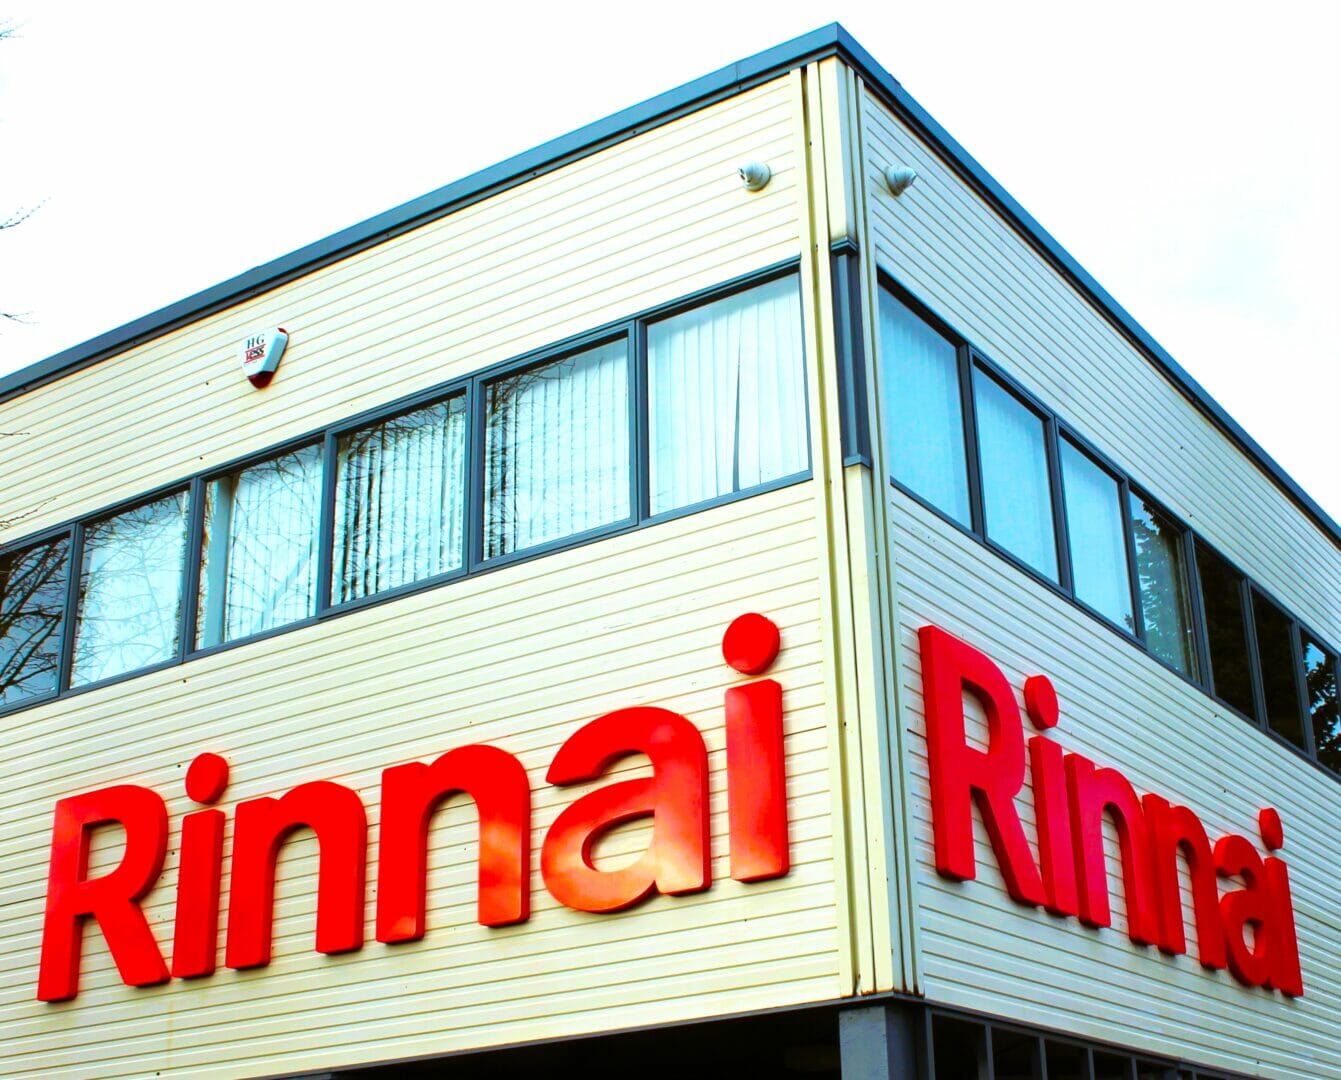 RINNAI RANGE OF COMMERCIAL CONTINUOUS FLOW WATER HEATERS CERTIFIED BY BRITISH STANDARDS INSTITUTION AS READY FOR HYDROGEN BLENDS @rinnai_uk